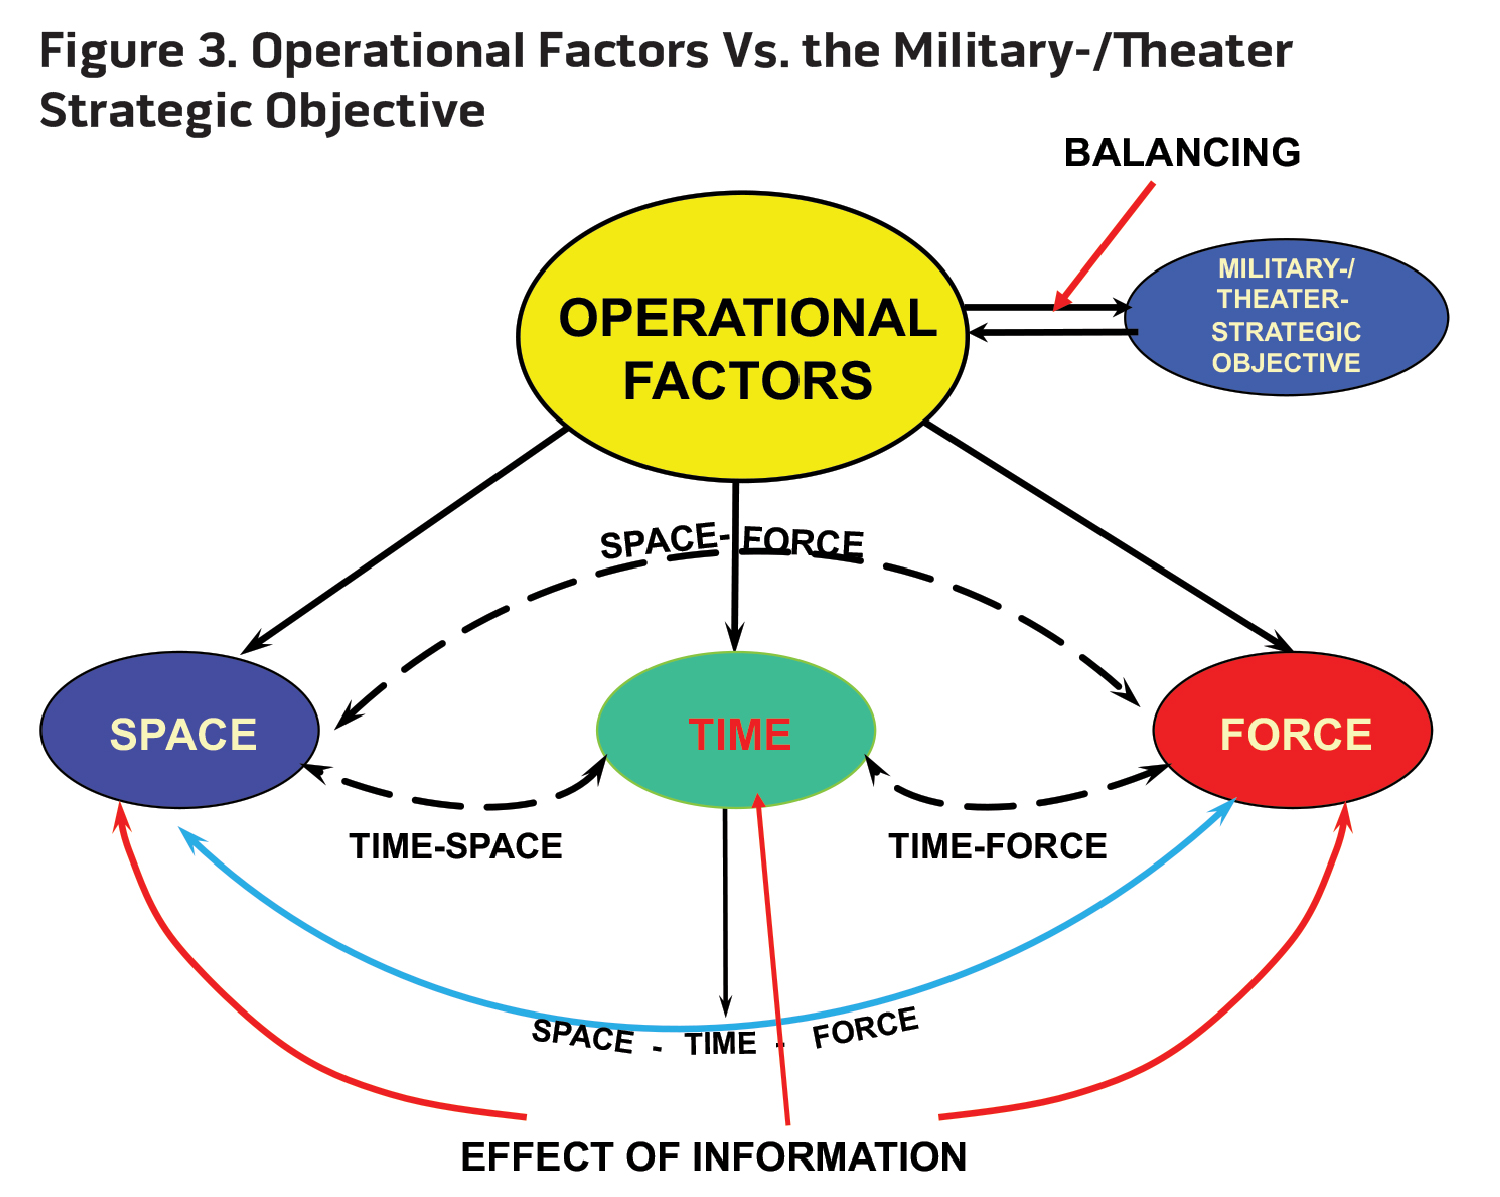 Figure 3. Operational Factors Vs. the Military-/Theater Strategic Objective